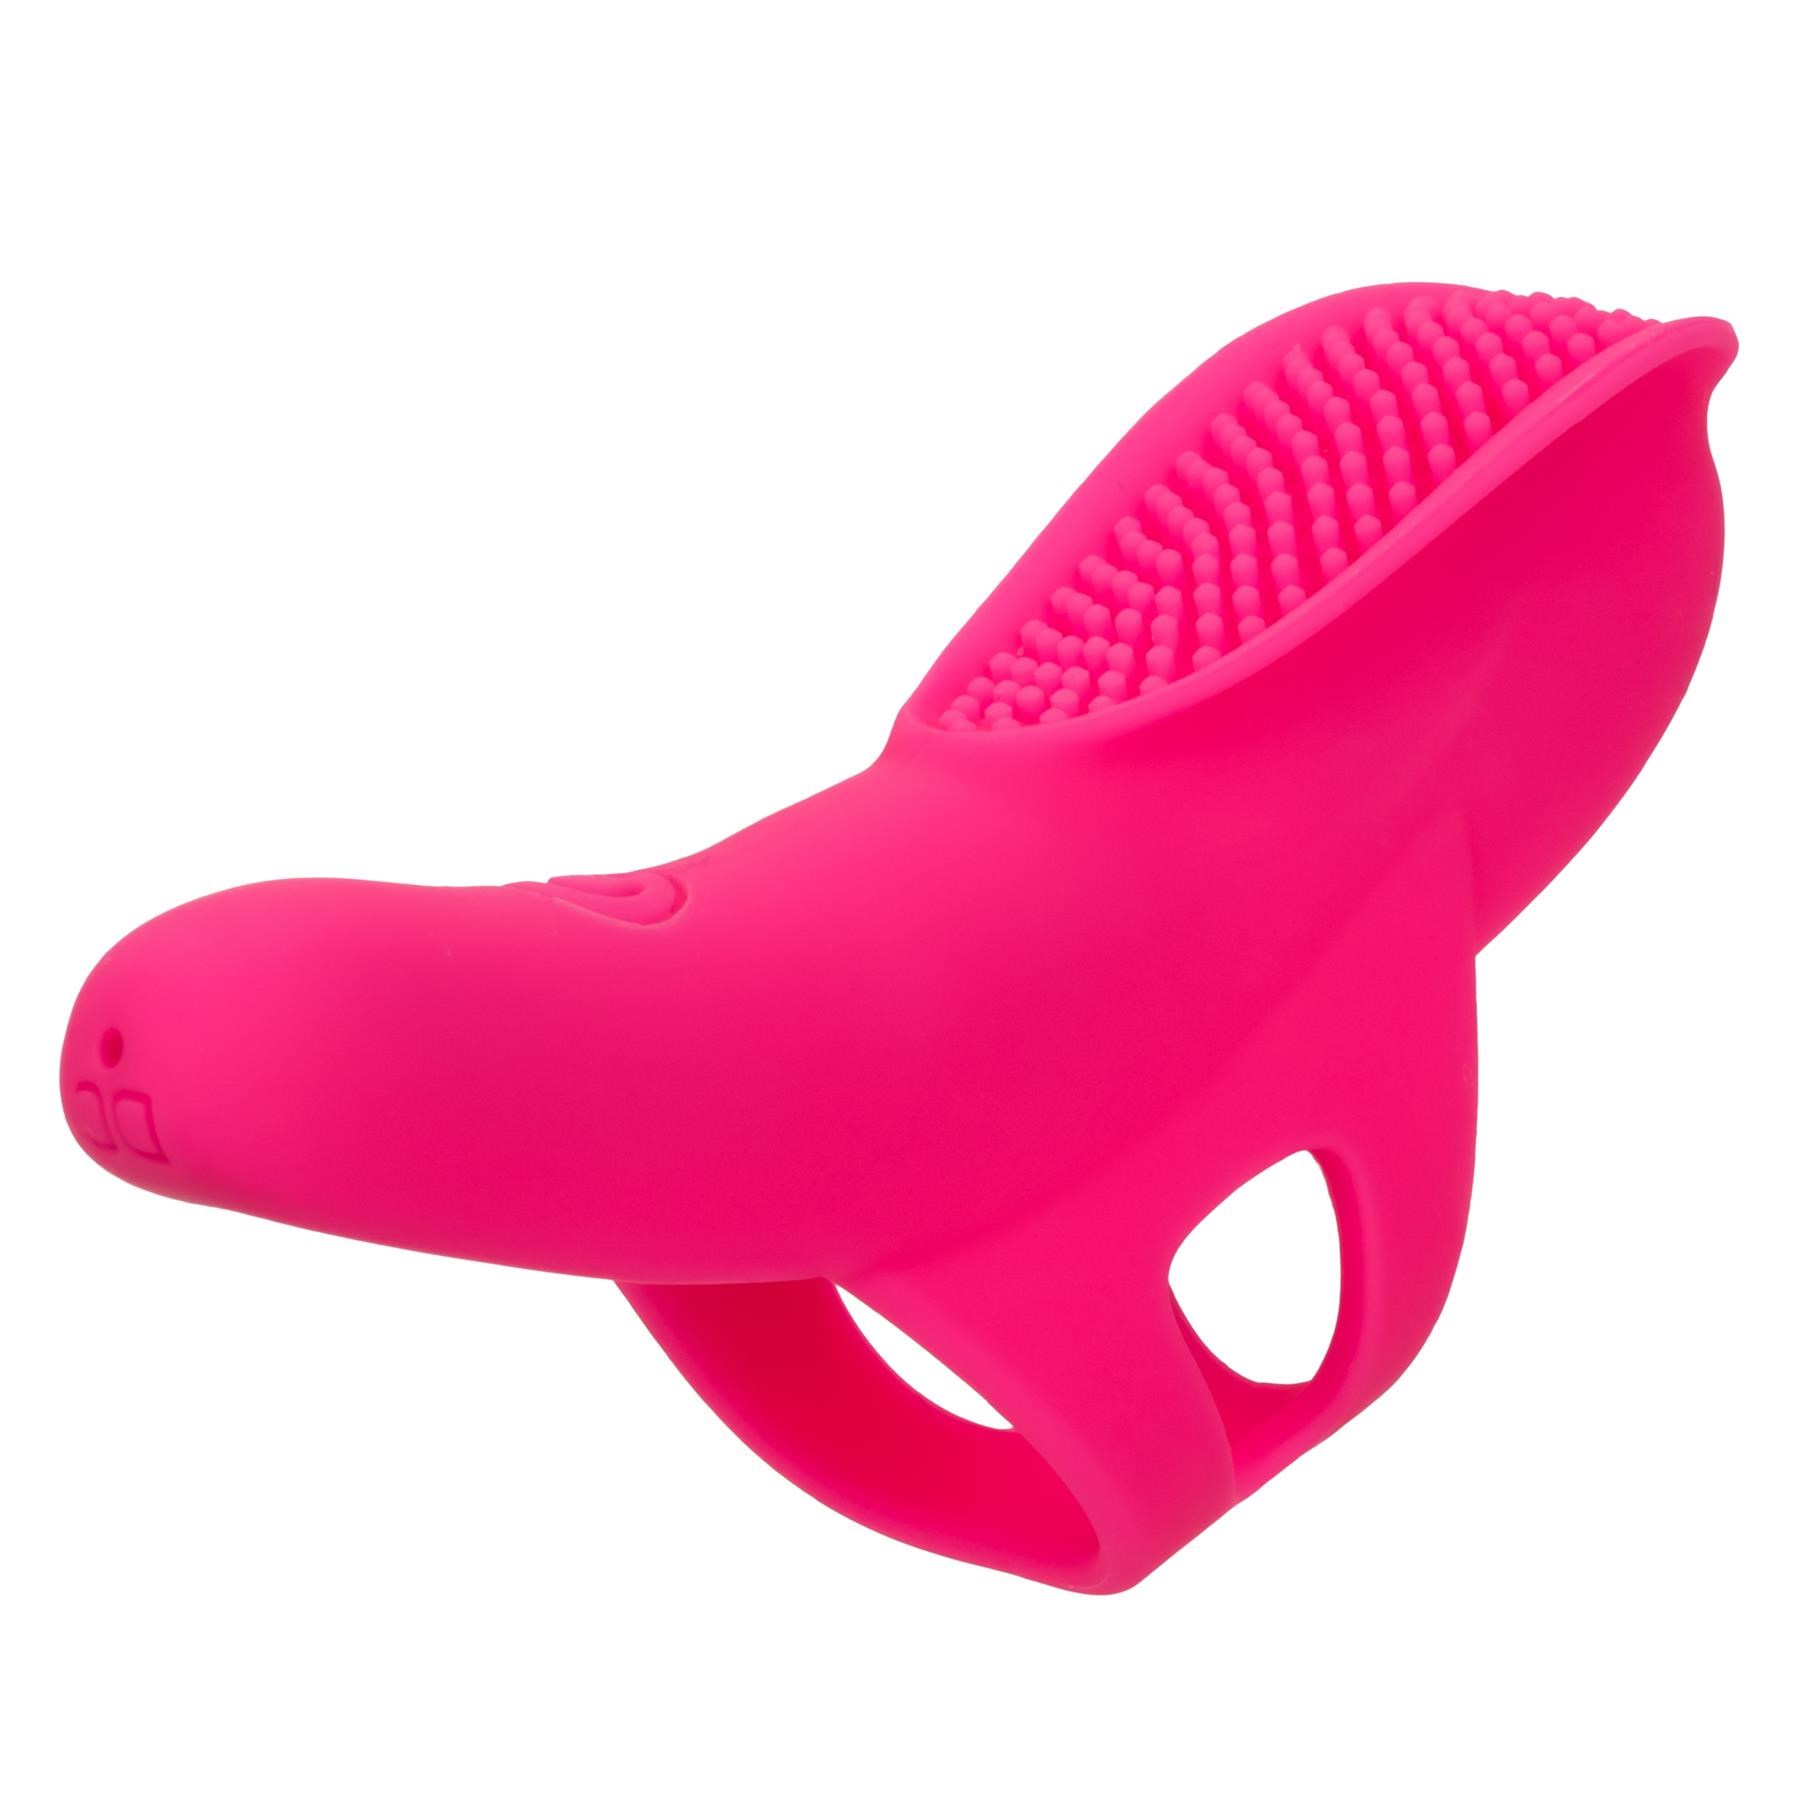 Neon Vibes The Nubby Finger Vibrator- Product Shot #4